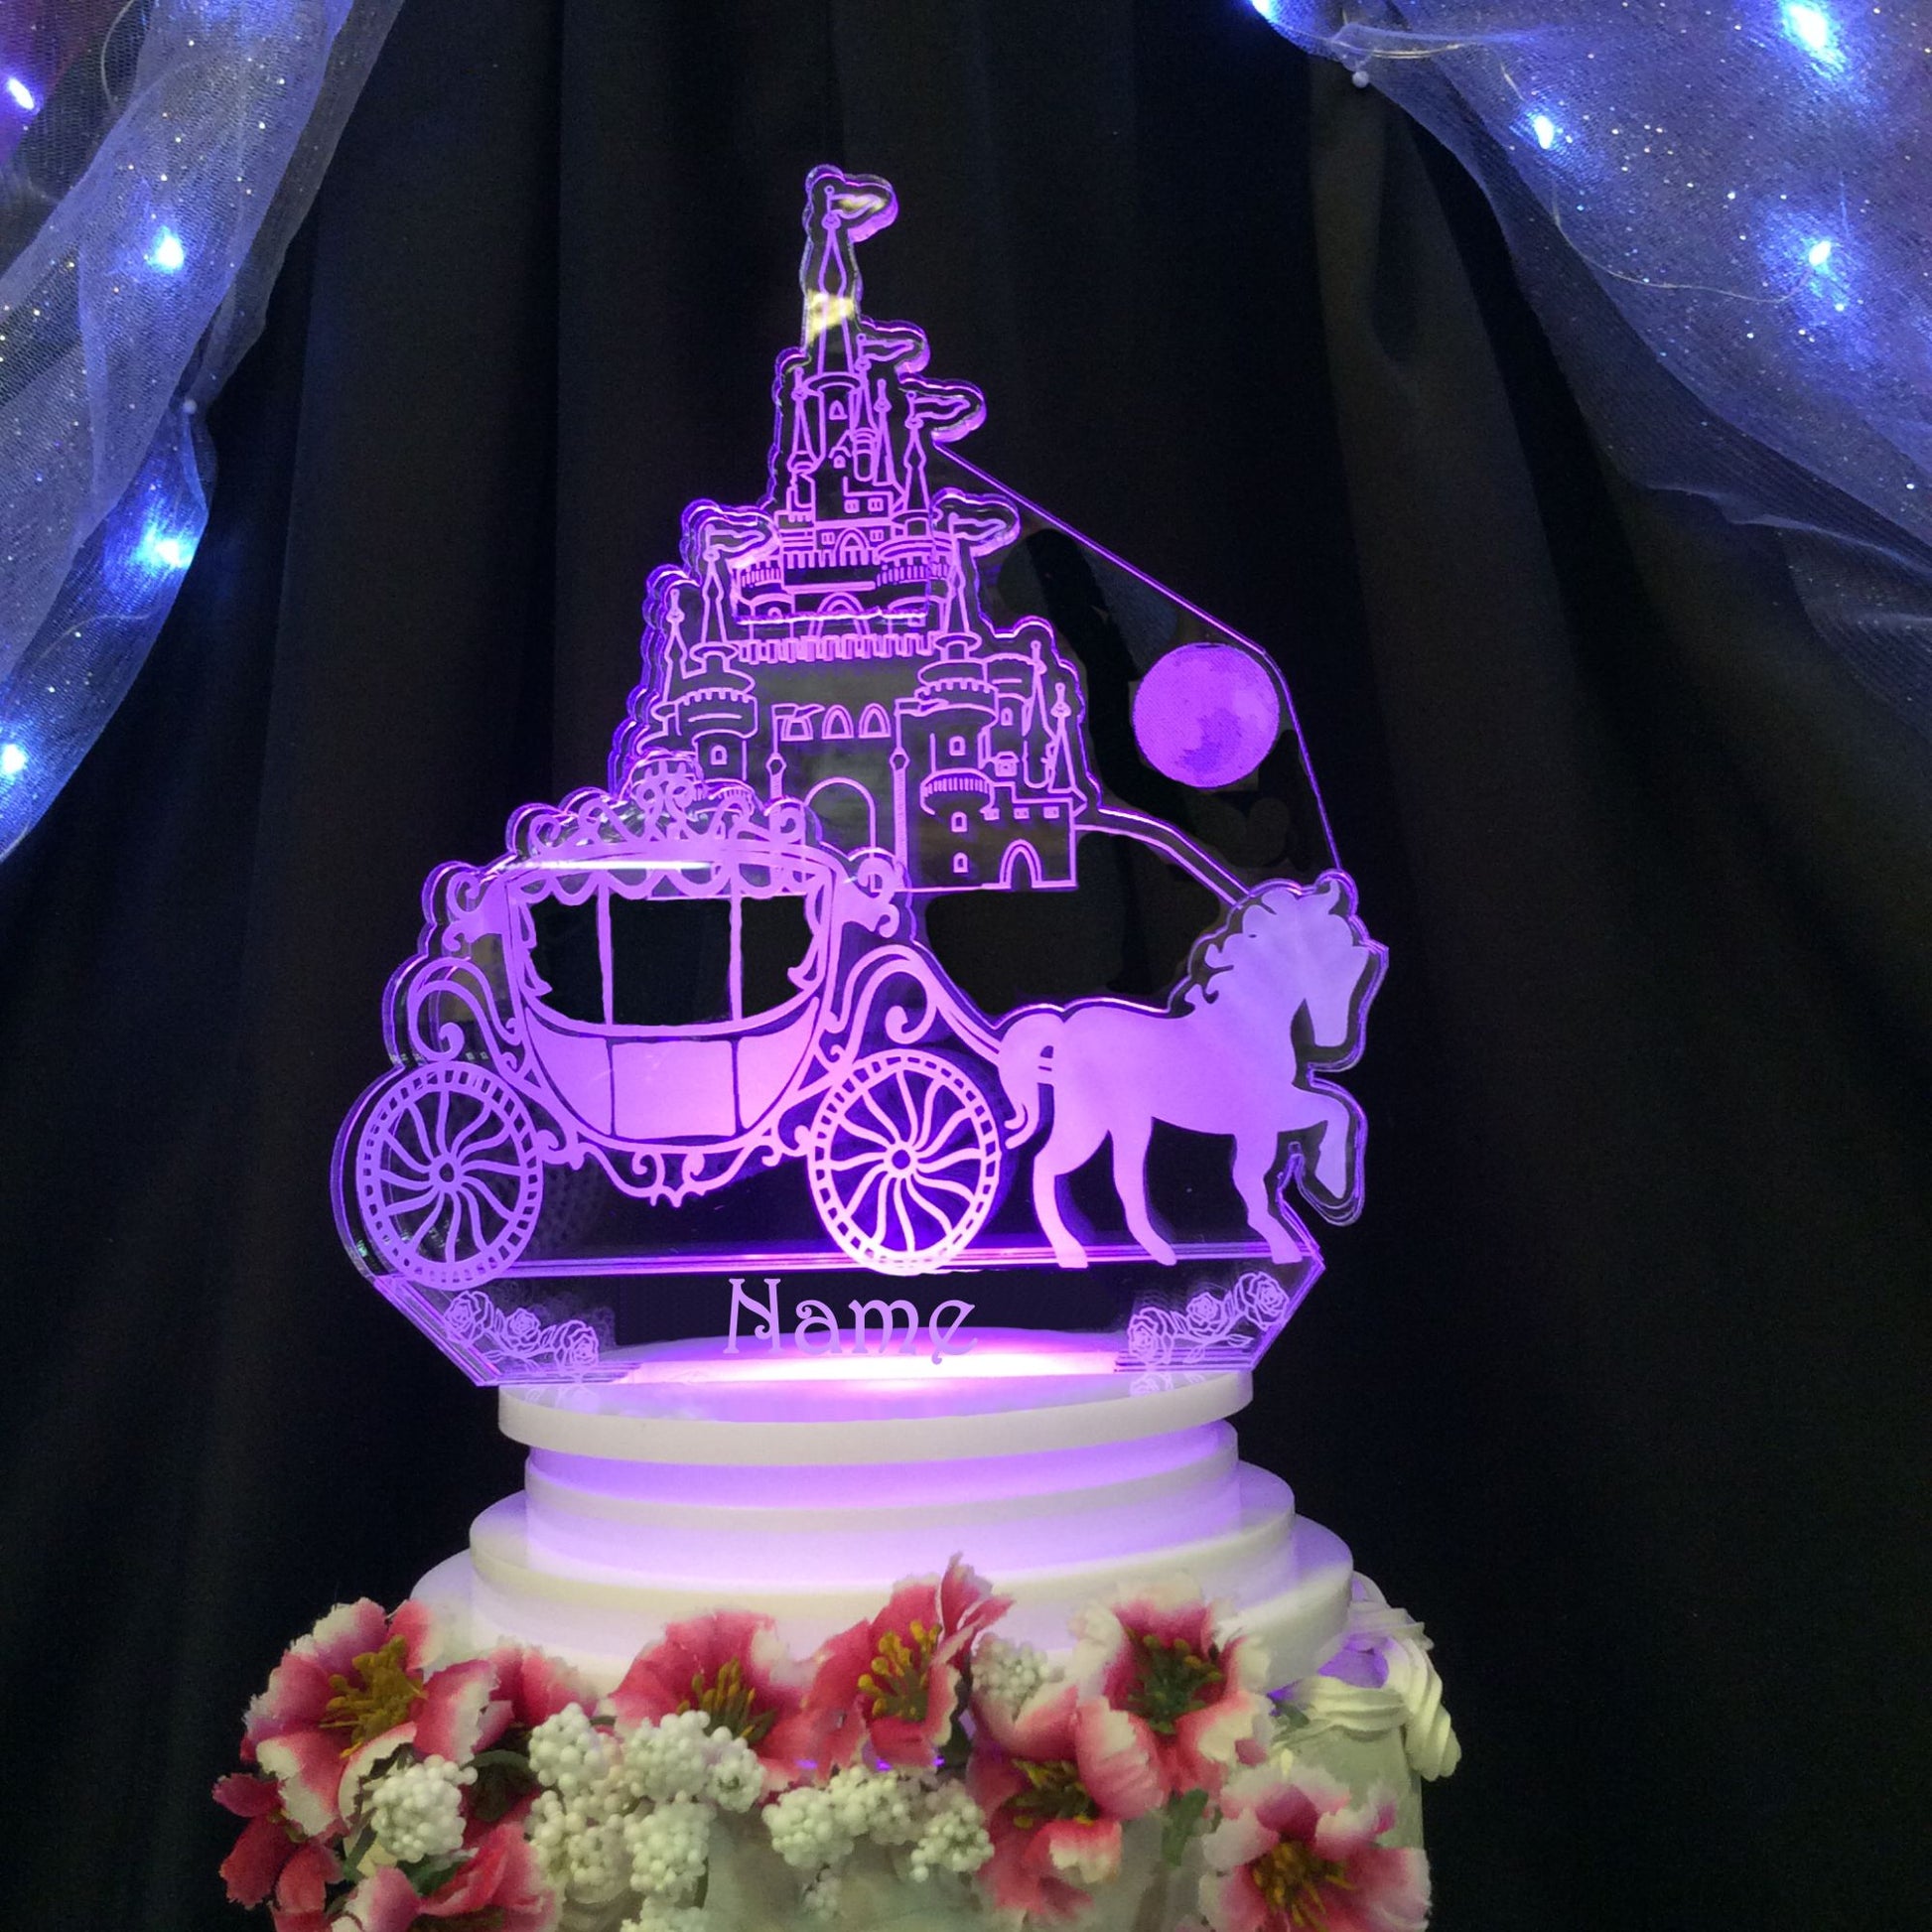 acrylic castle and carriage cake topper, shown lit up in a light lavender color, engraved with a name